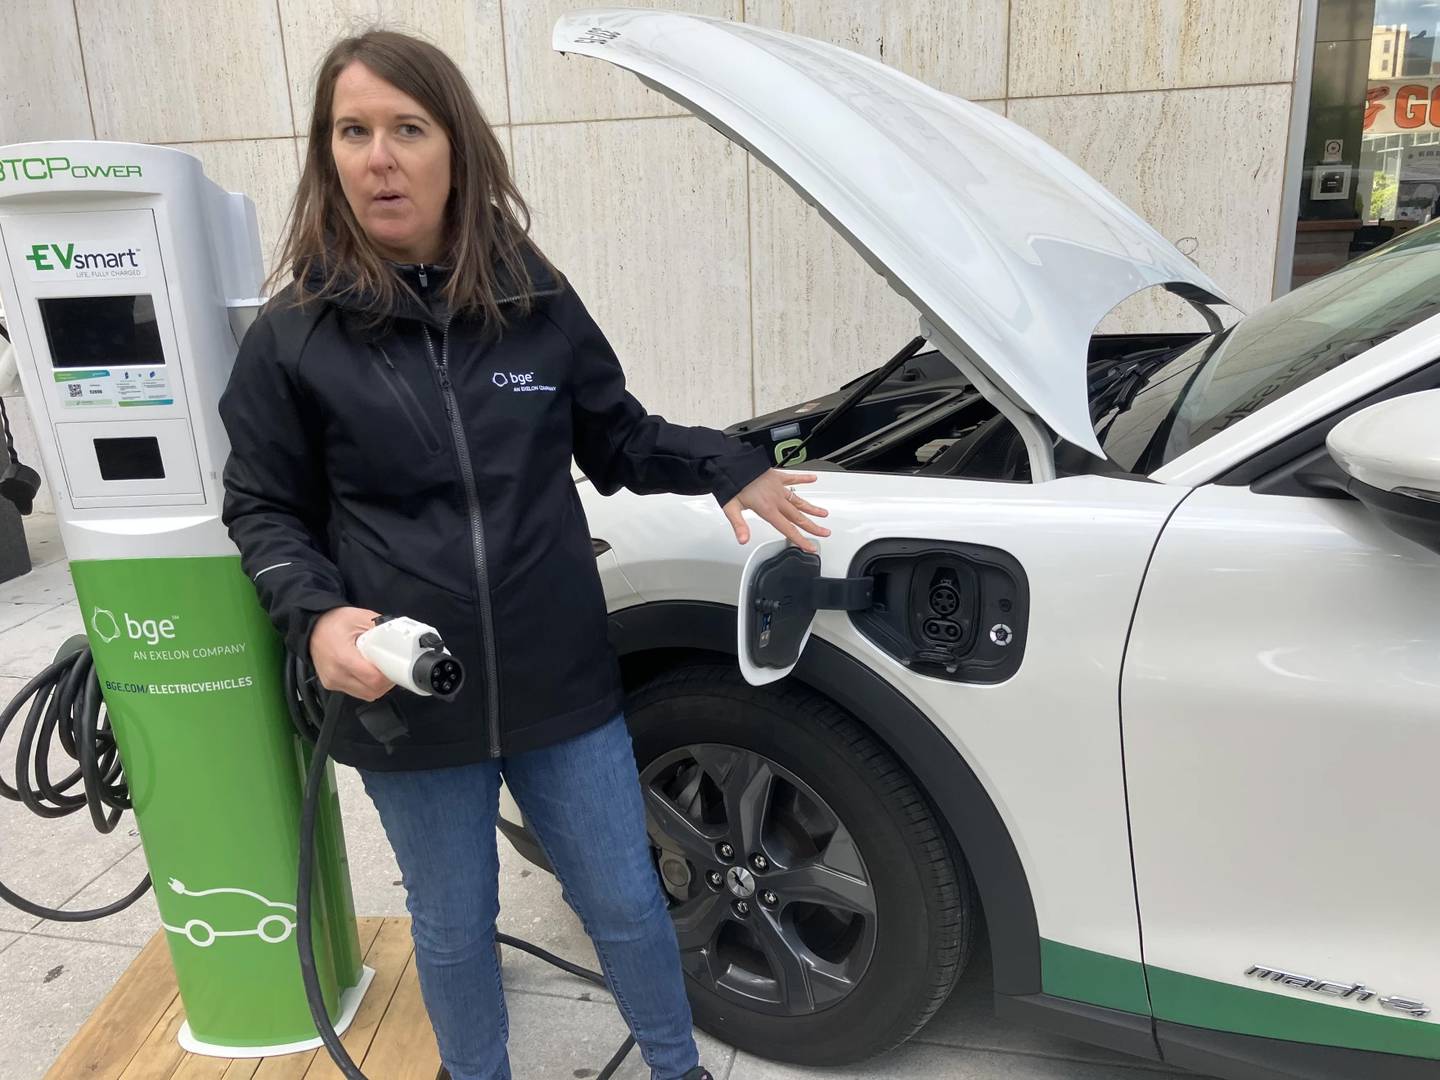 Stephanie Leach with BGE demonstrates EV charging at an event at State Center in Baltimore.